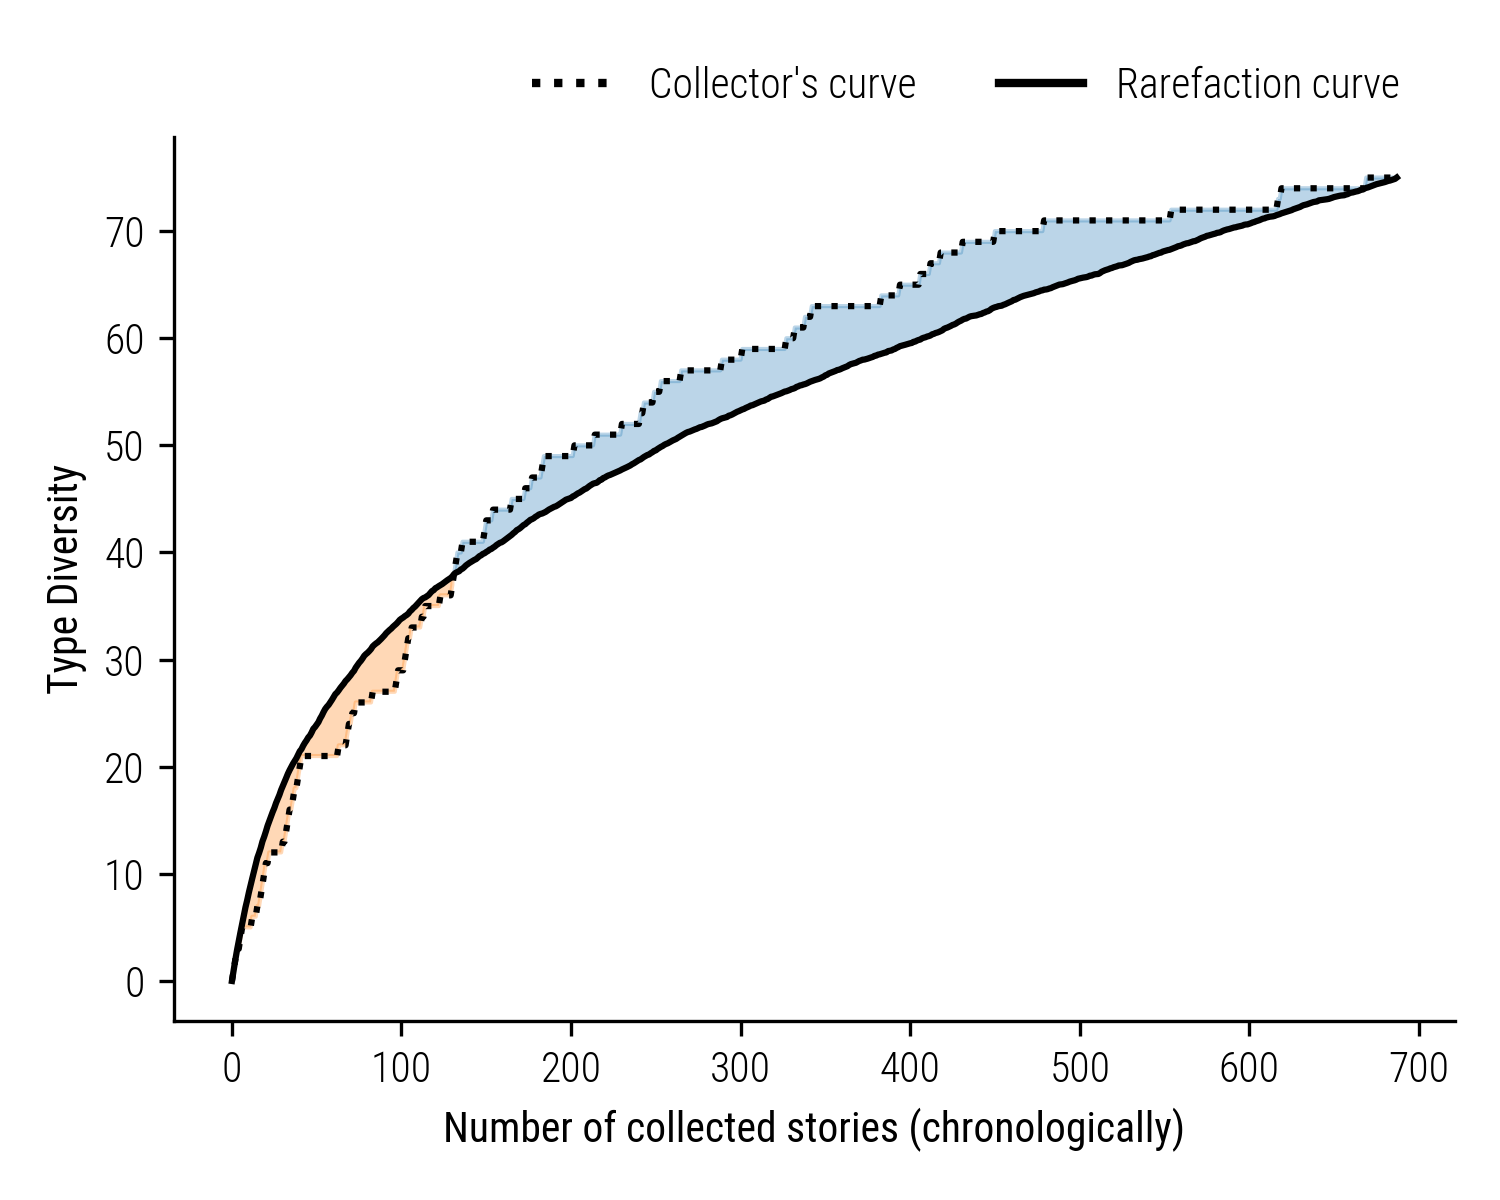 Figure 4: Keuning&rsquo;s Active Exploration: The dotted line shows the actual diversity of stories collected by Keuning, while the solid line indicates the expected rarefaction curve. The blue shaded area denotes Keuning&rsquo;s tendency to seek out and collect new story types beyond the neutral model&rsquo;s prediction.